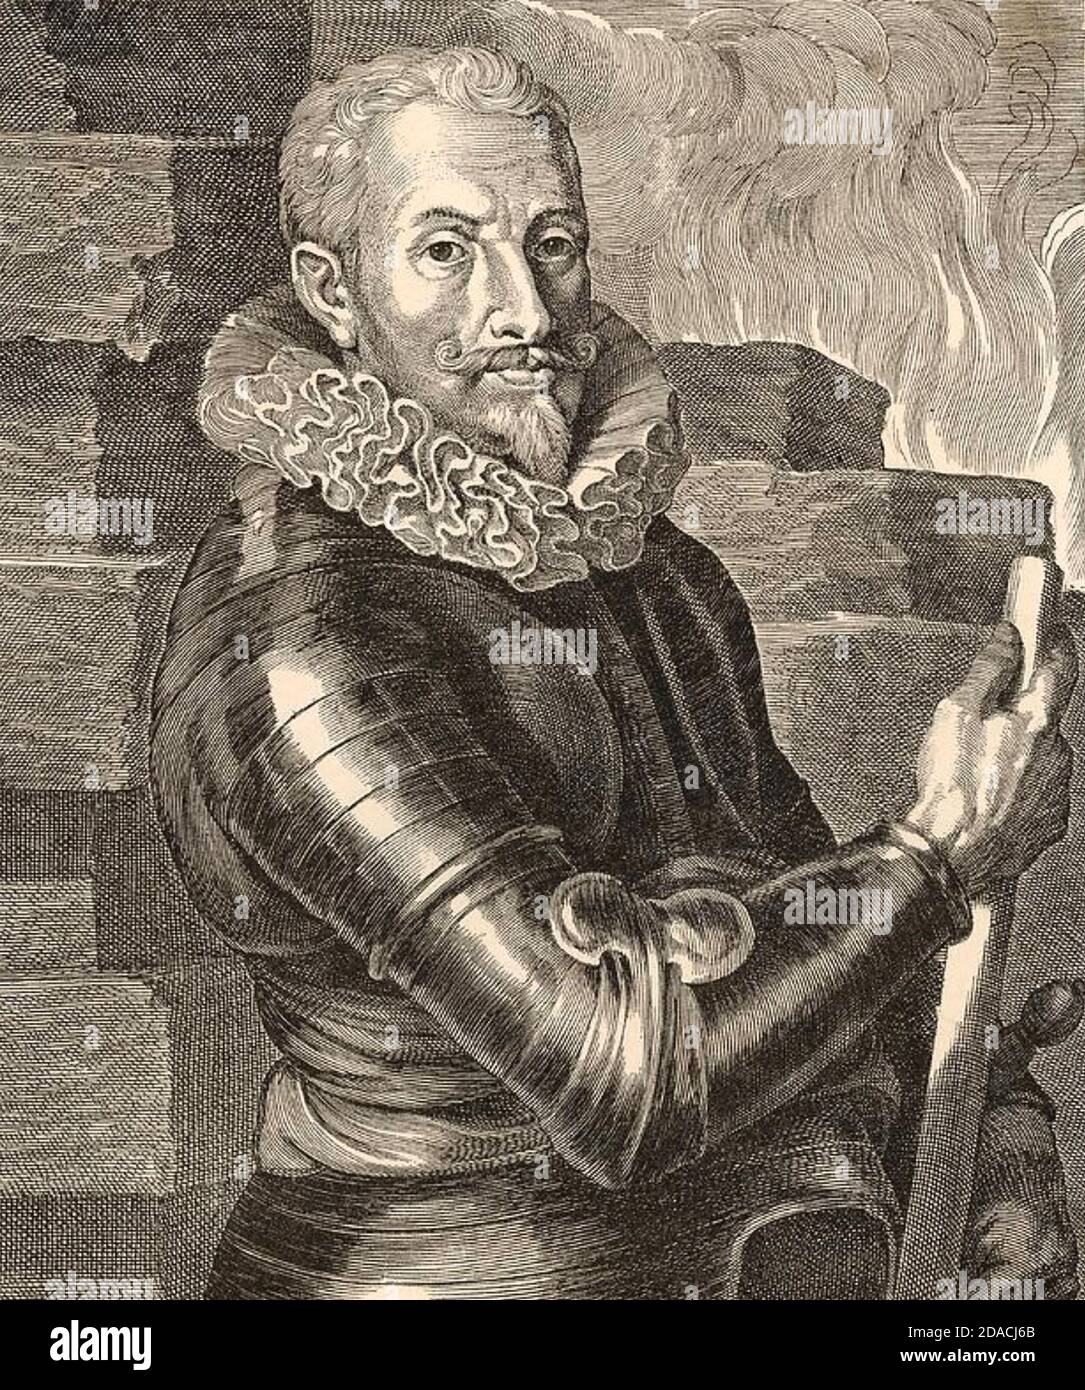 JOHANN TSERCLAES, Count of Tilly (1559-1632) commanded the Catholic League during the Thirty Years War Stock Photo